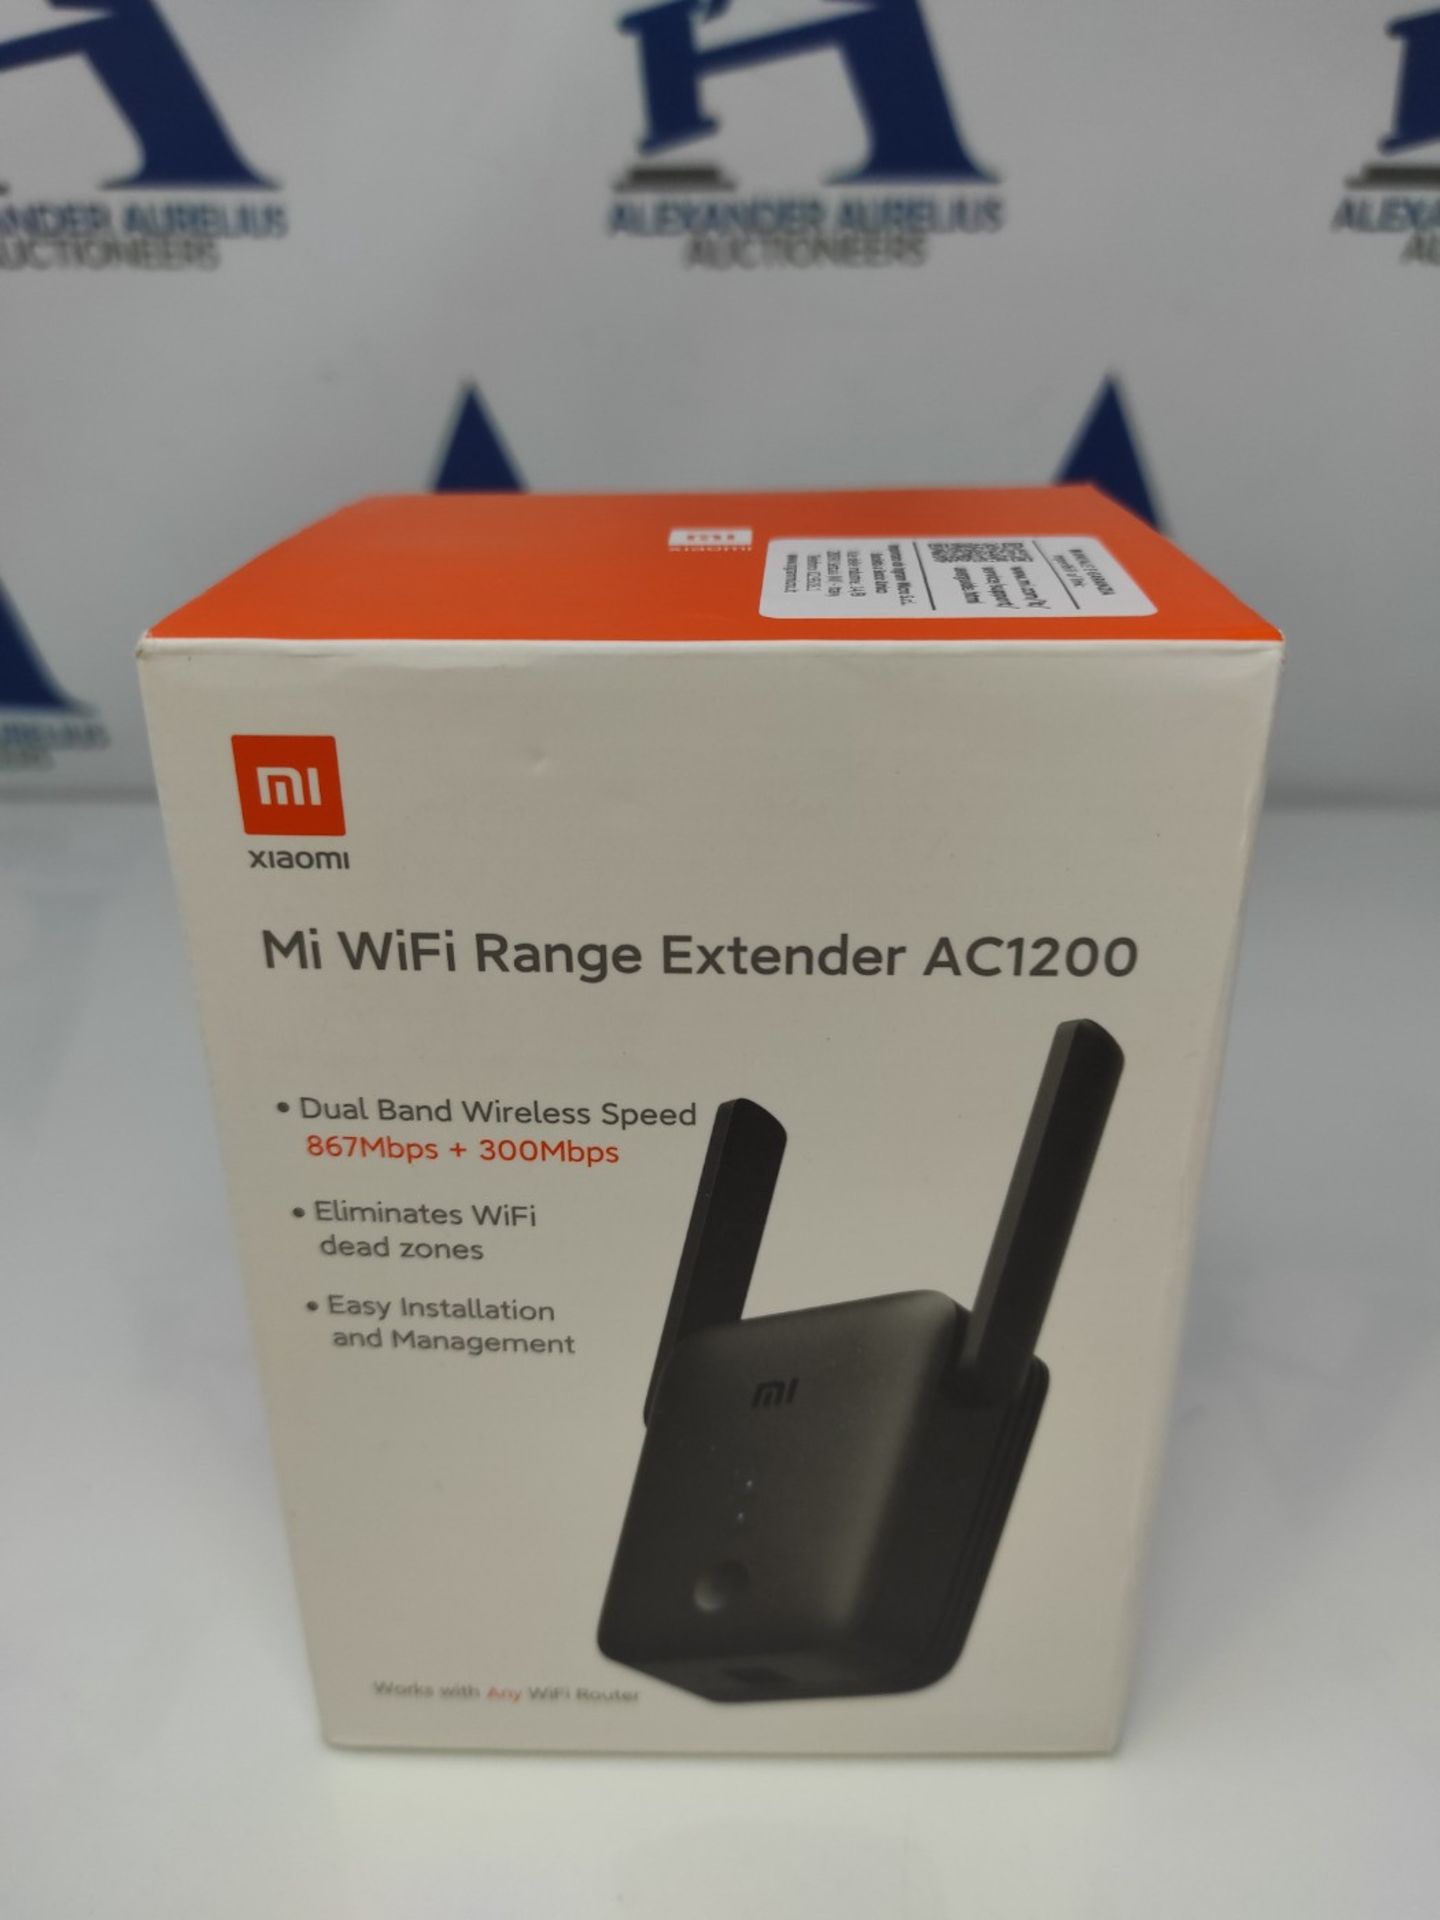 Xiaomi Mi Wi-Fi Range Extender Ac 1200, Wireless Dual Band 867Mbps+300Mbps, 2.4 GHz an - Image 2 of 6